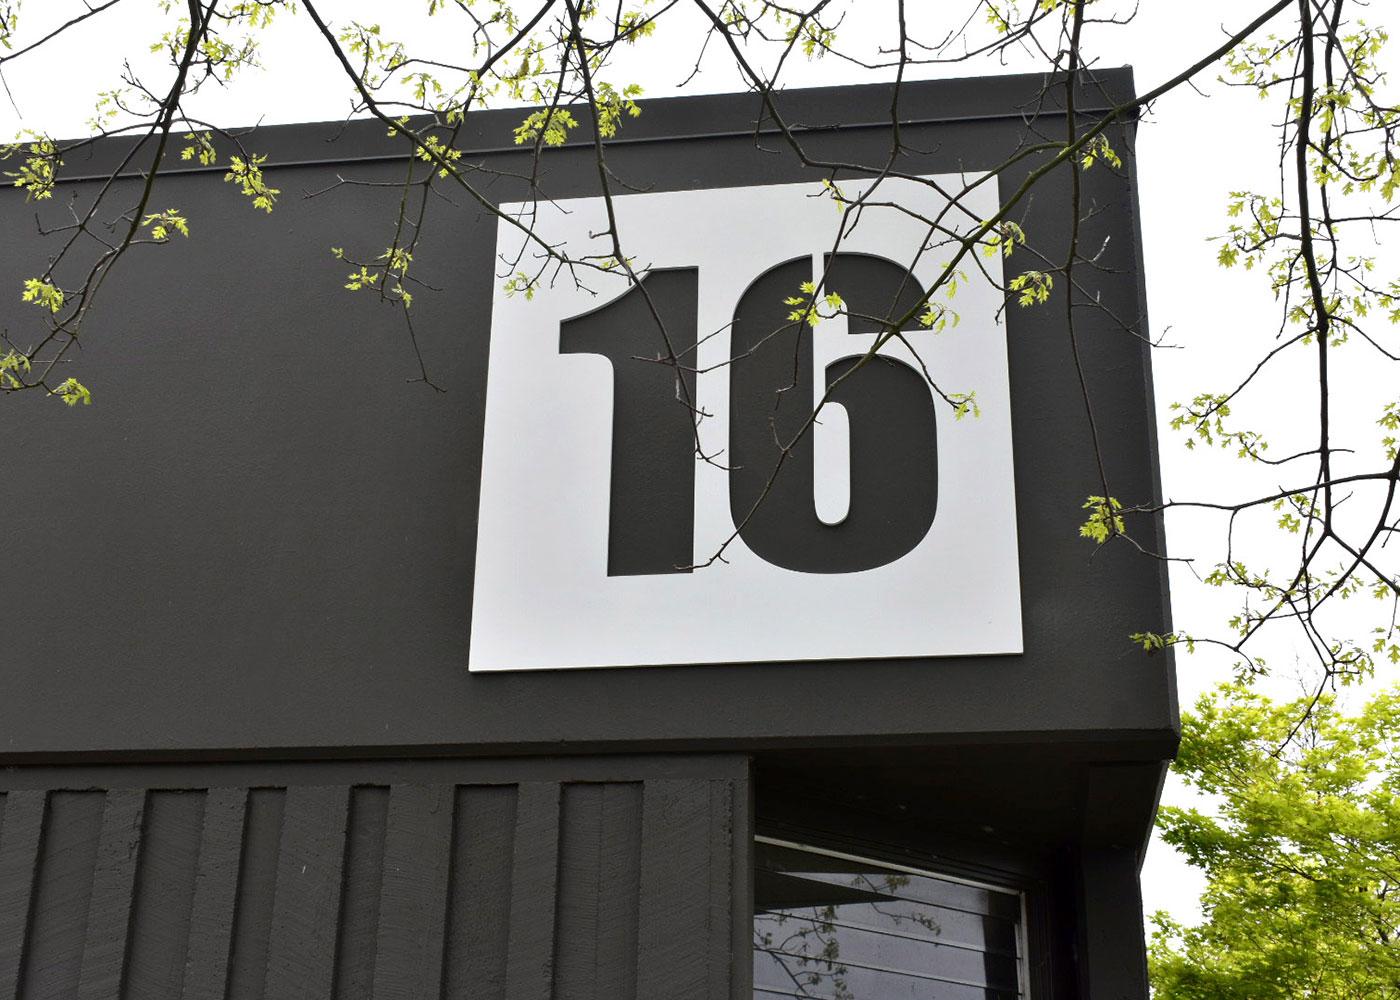 Each building received updated painted PVC panels that call out the building number.